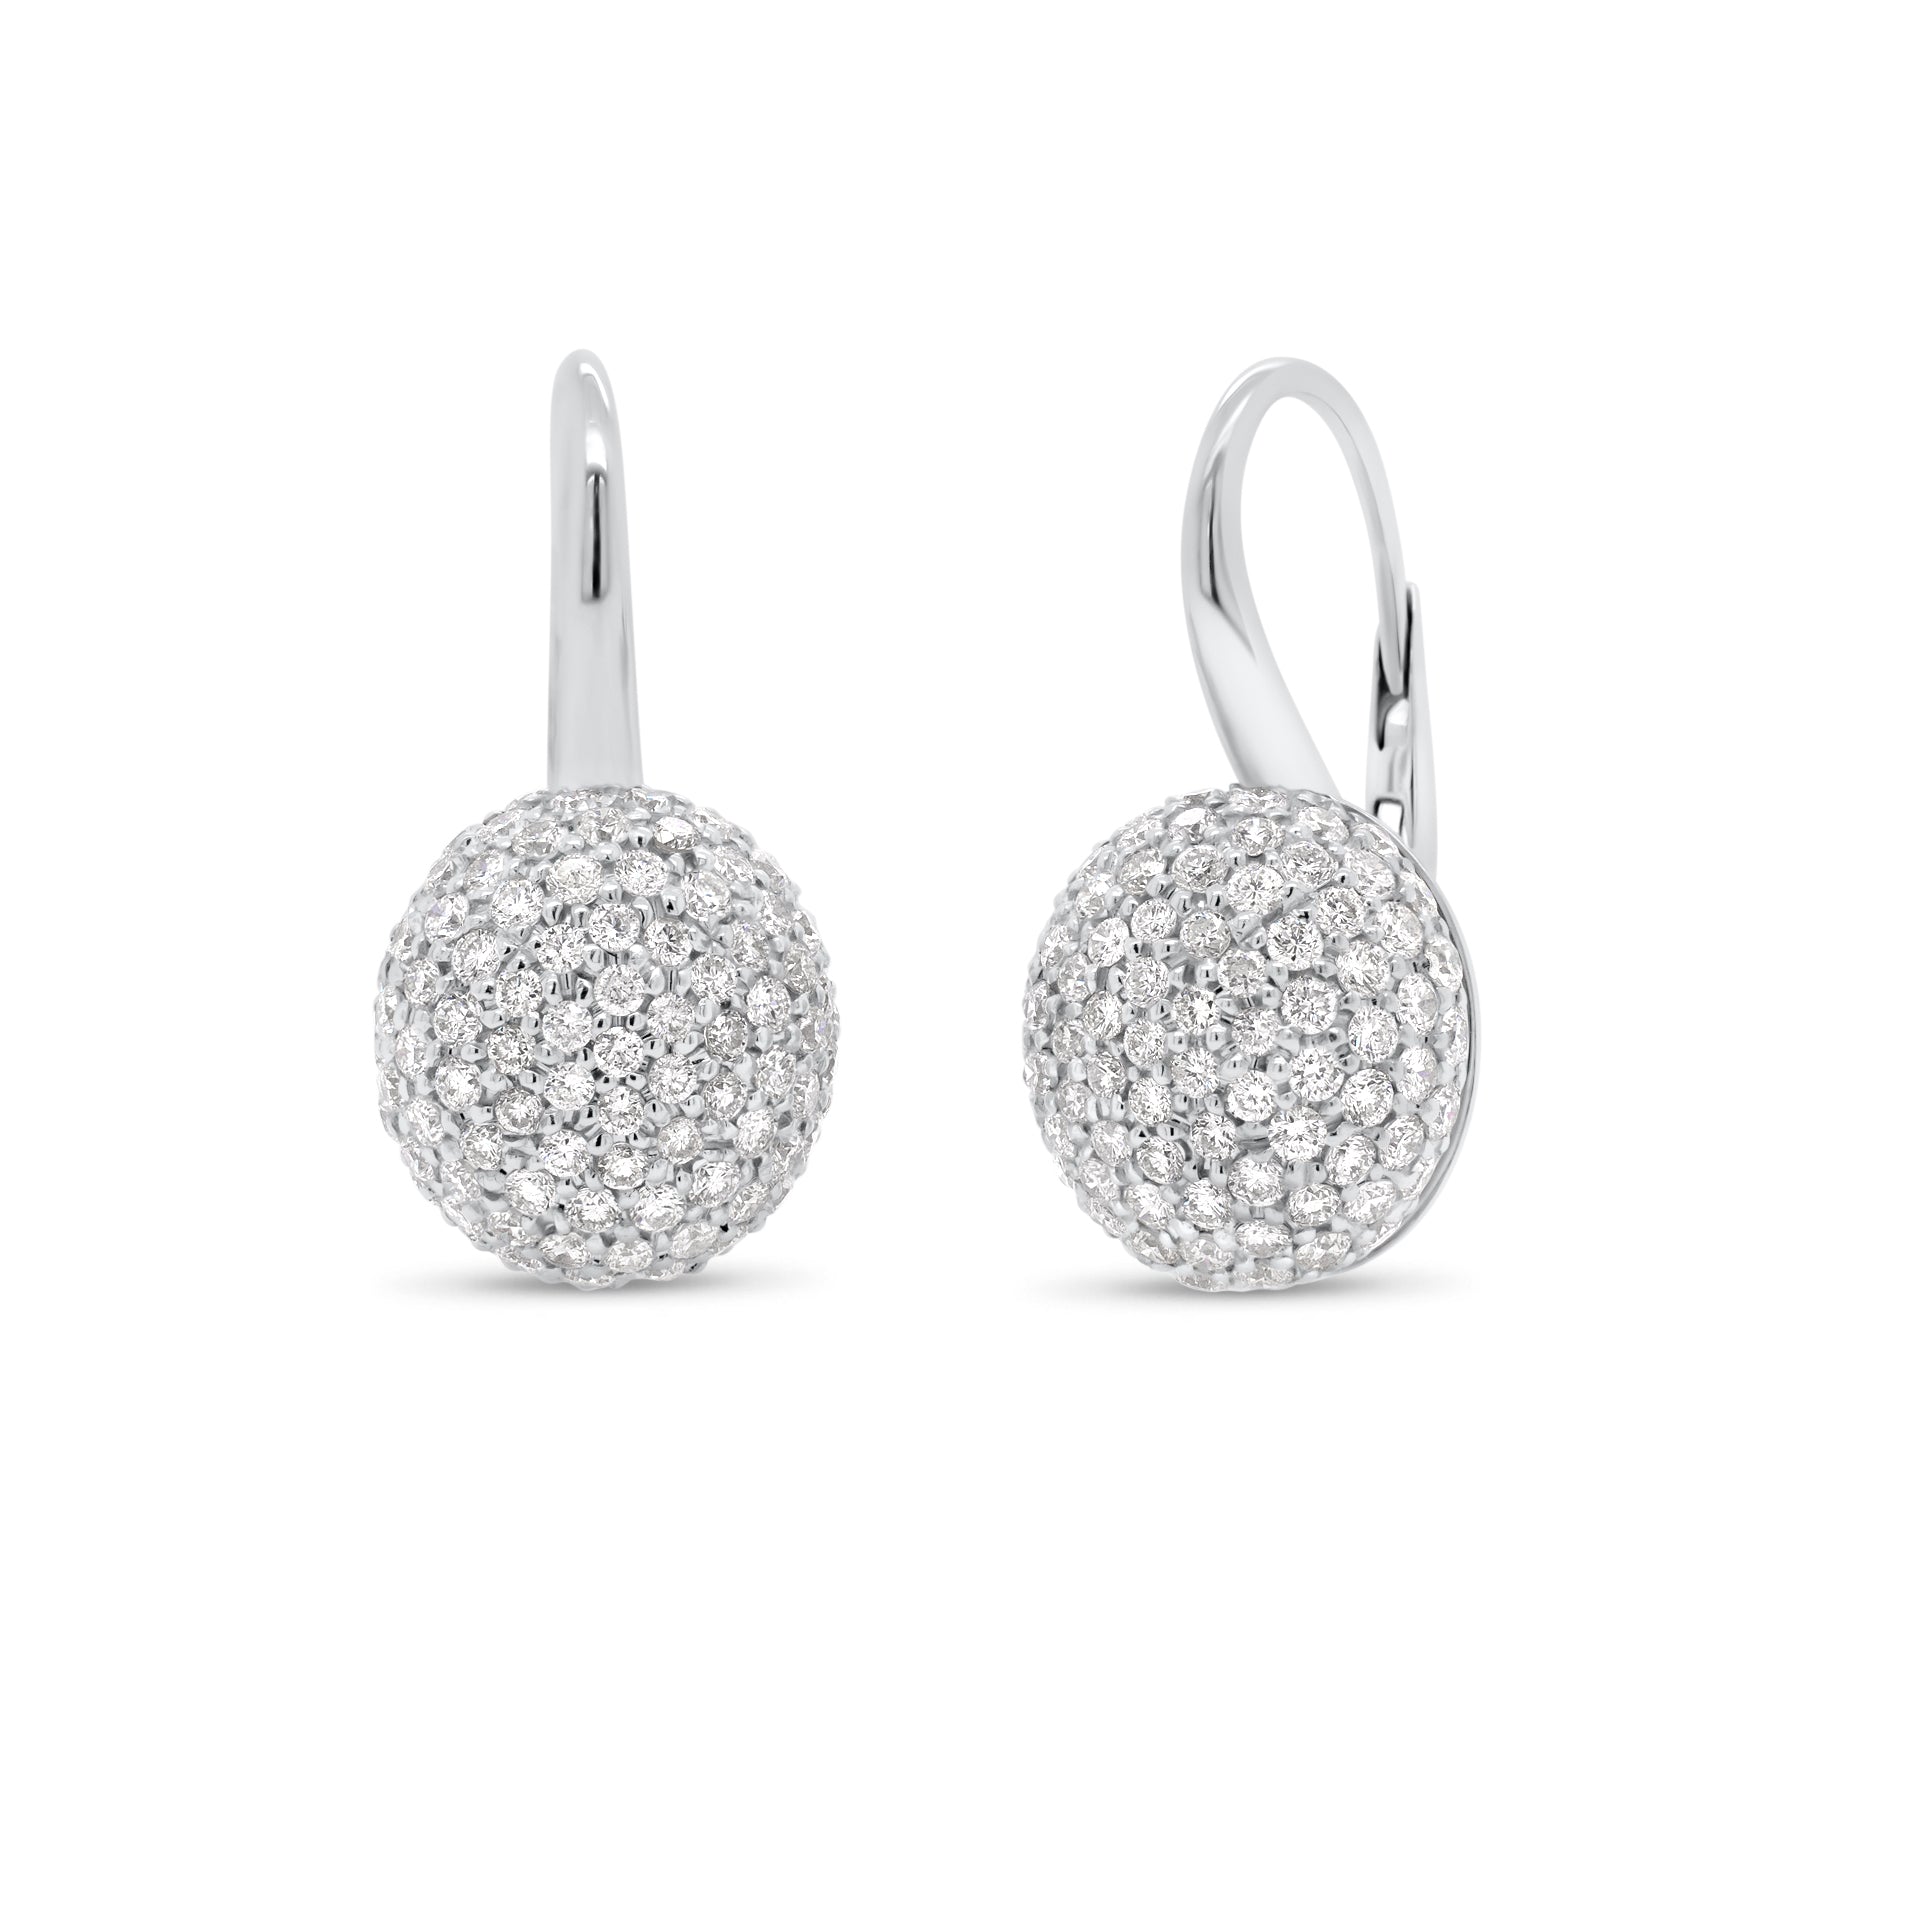 Diamond Domed Lever-Back Earrings.  -18K white gold weighing 6.42 grams  -190 round pave set diamonds totaling 2.23 carats